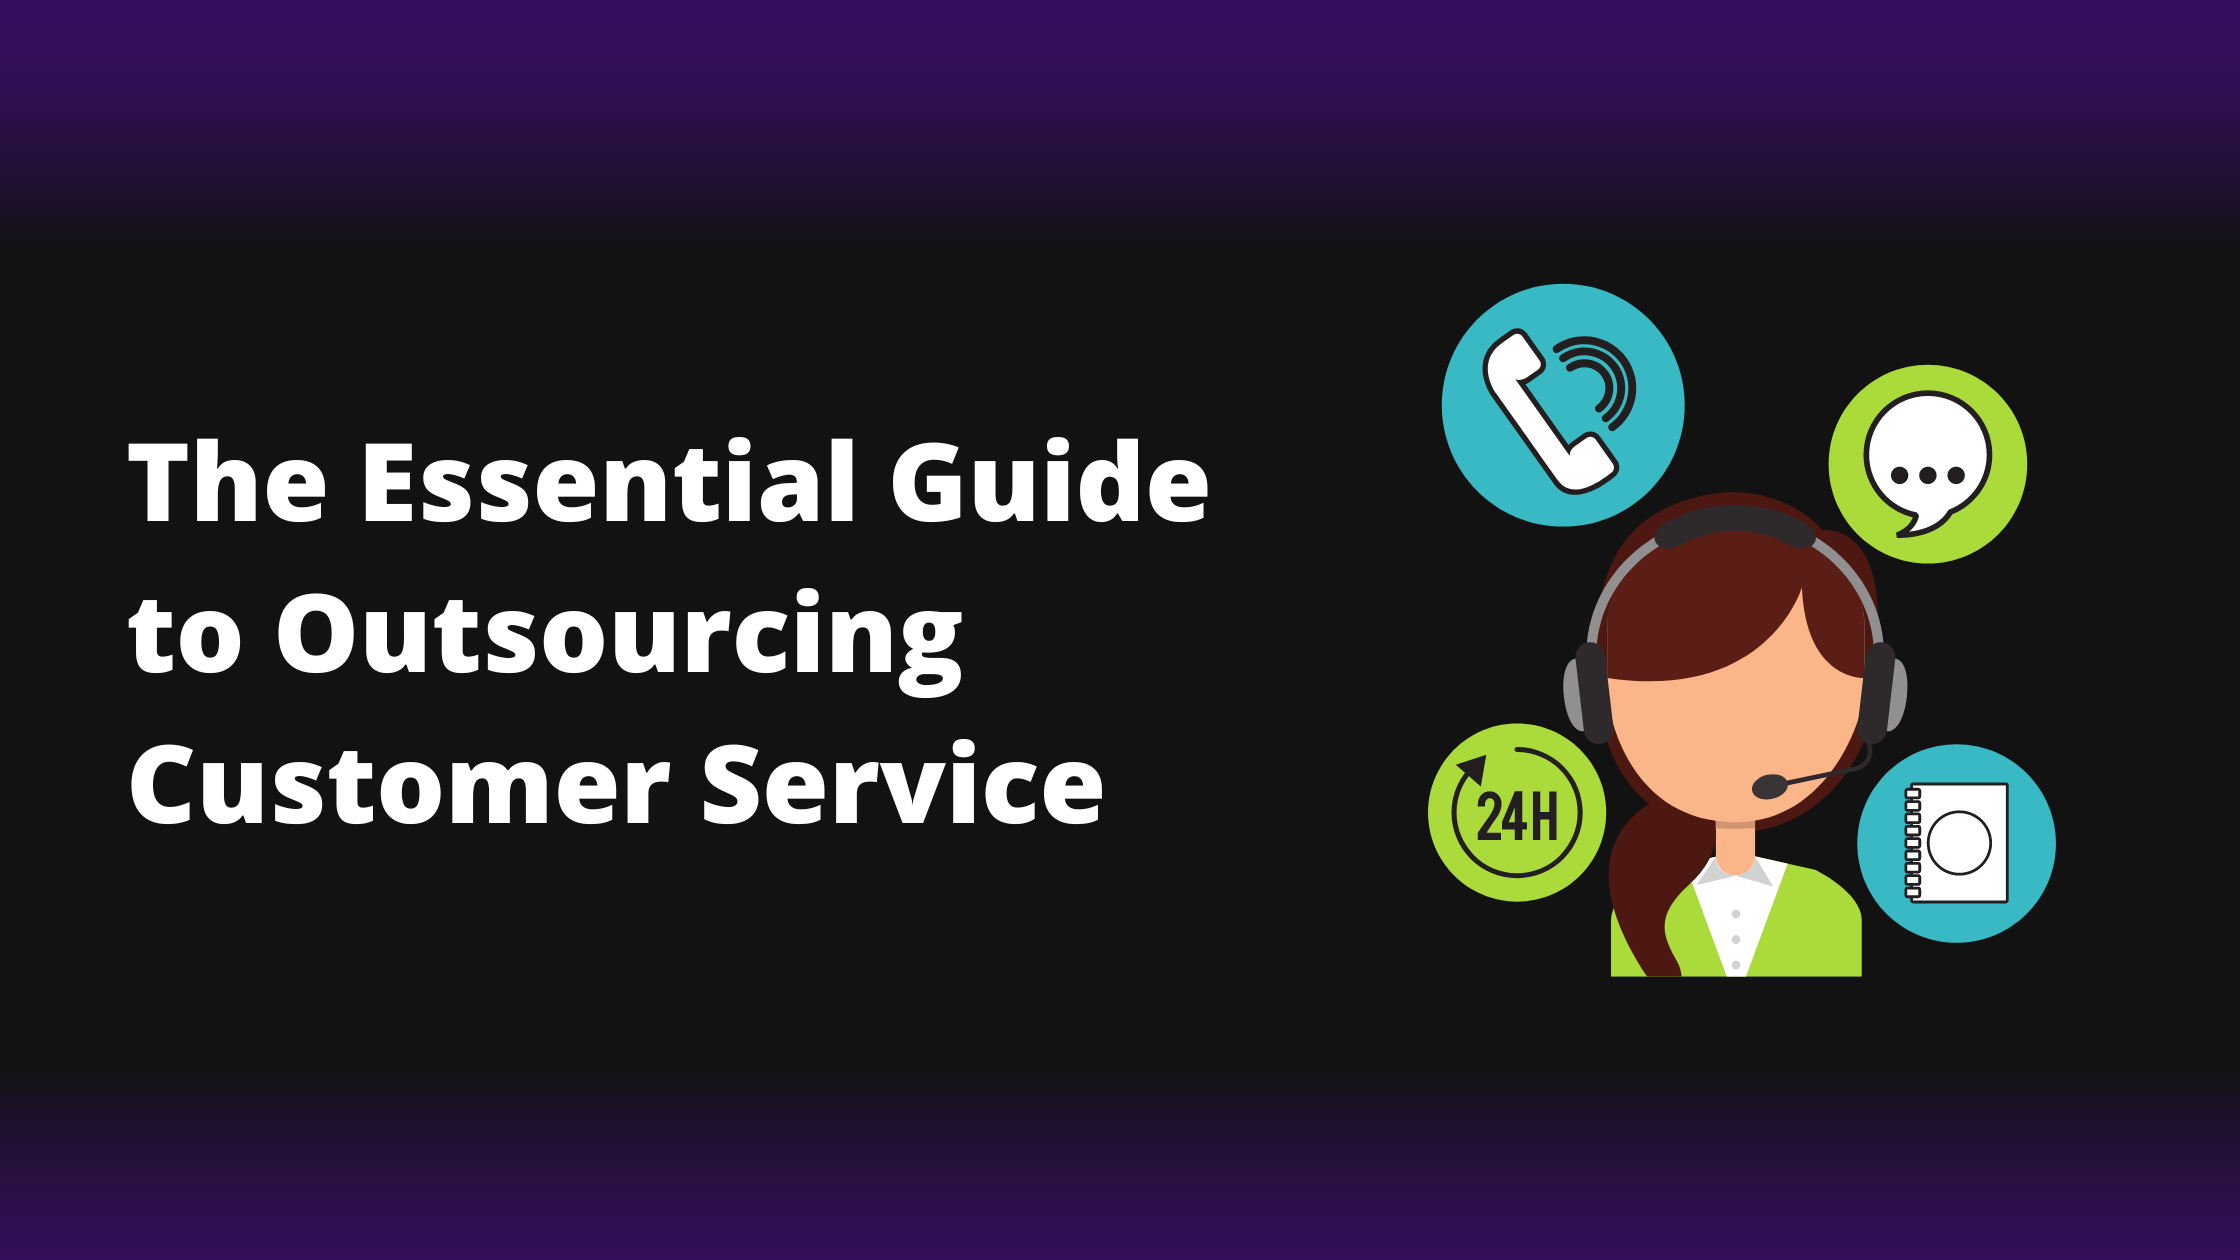 The Essential Guide to Outsourcing Customer Service